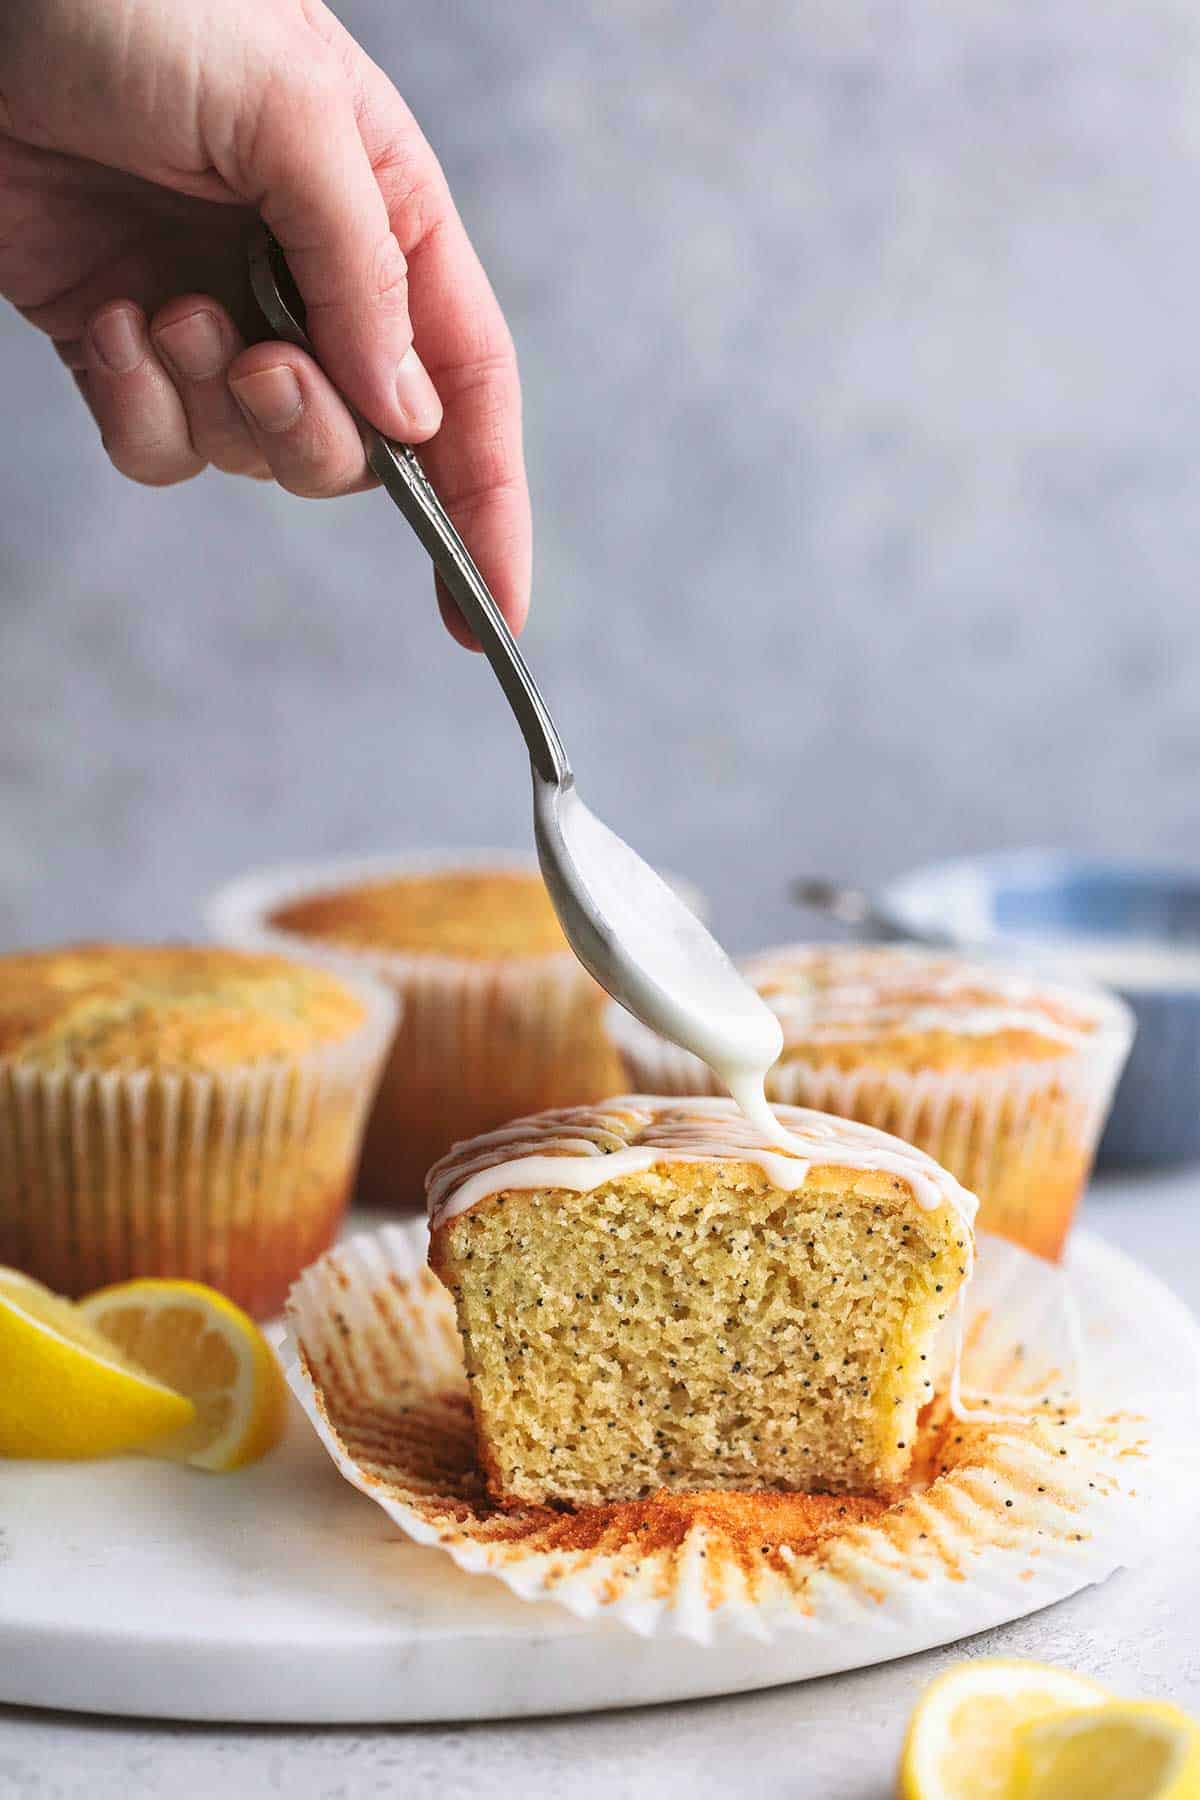 a hand holding a spoon drizzling white glaze on top of a lemon poppyseed muffin.